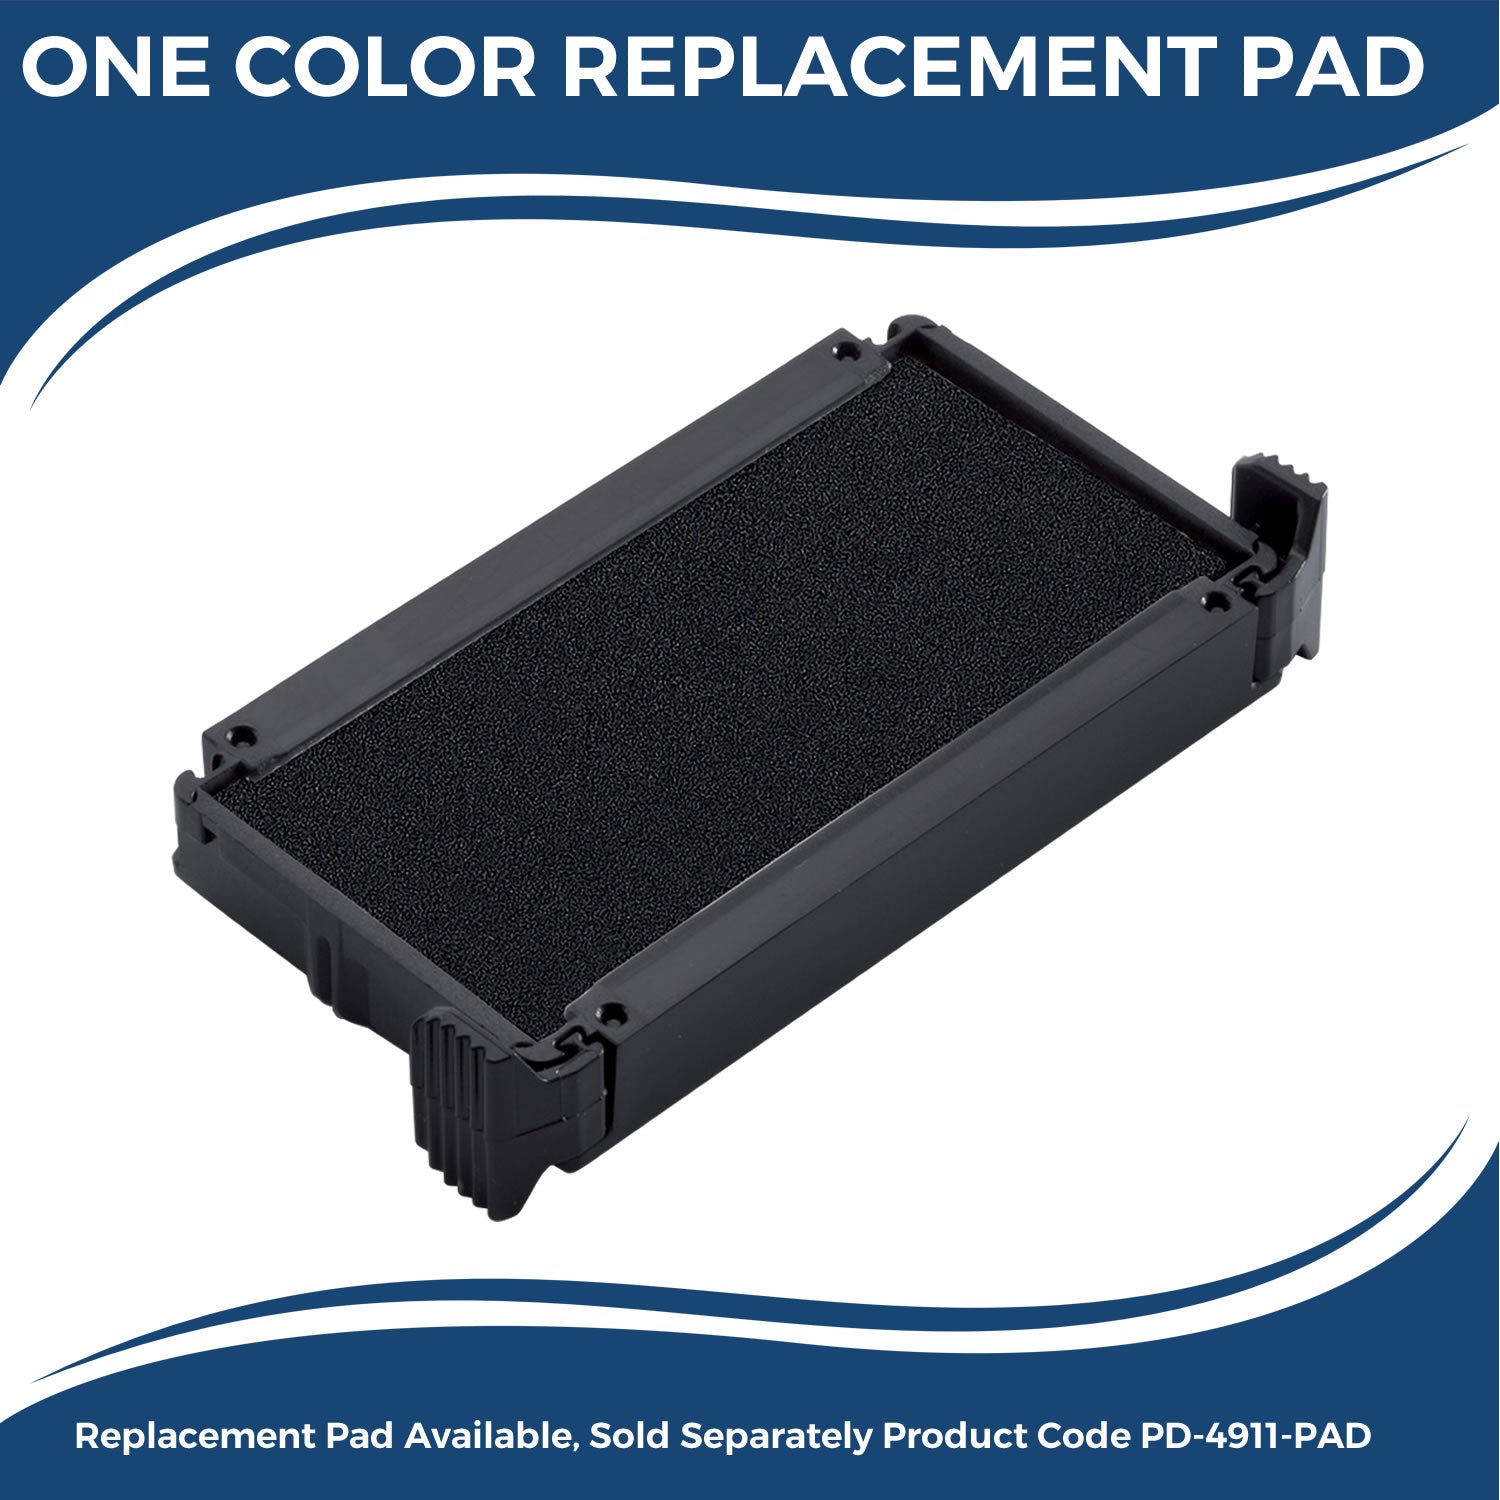 Replacement Pad for Self-Inking Judge's Copy Stamp